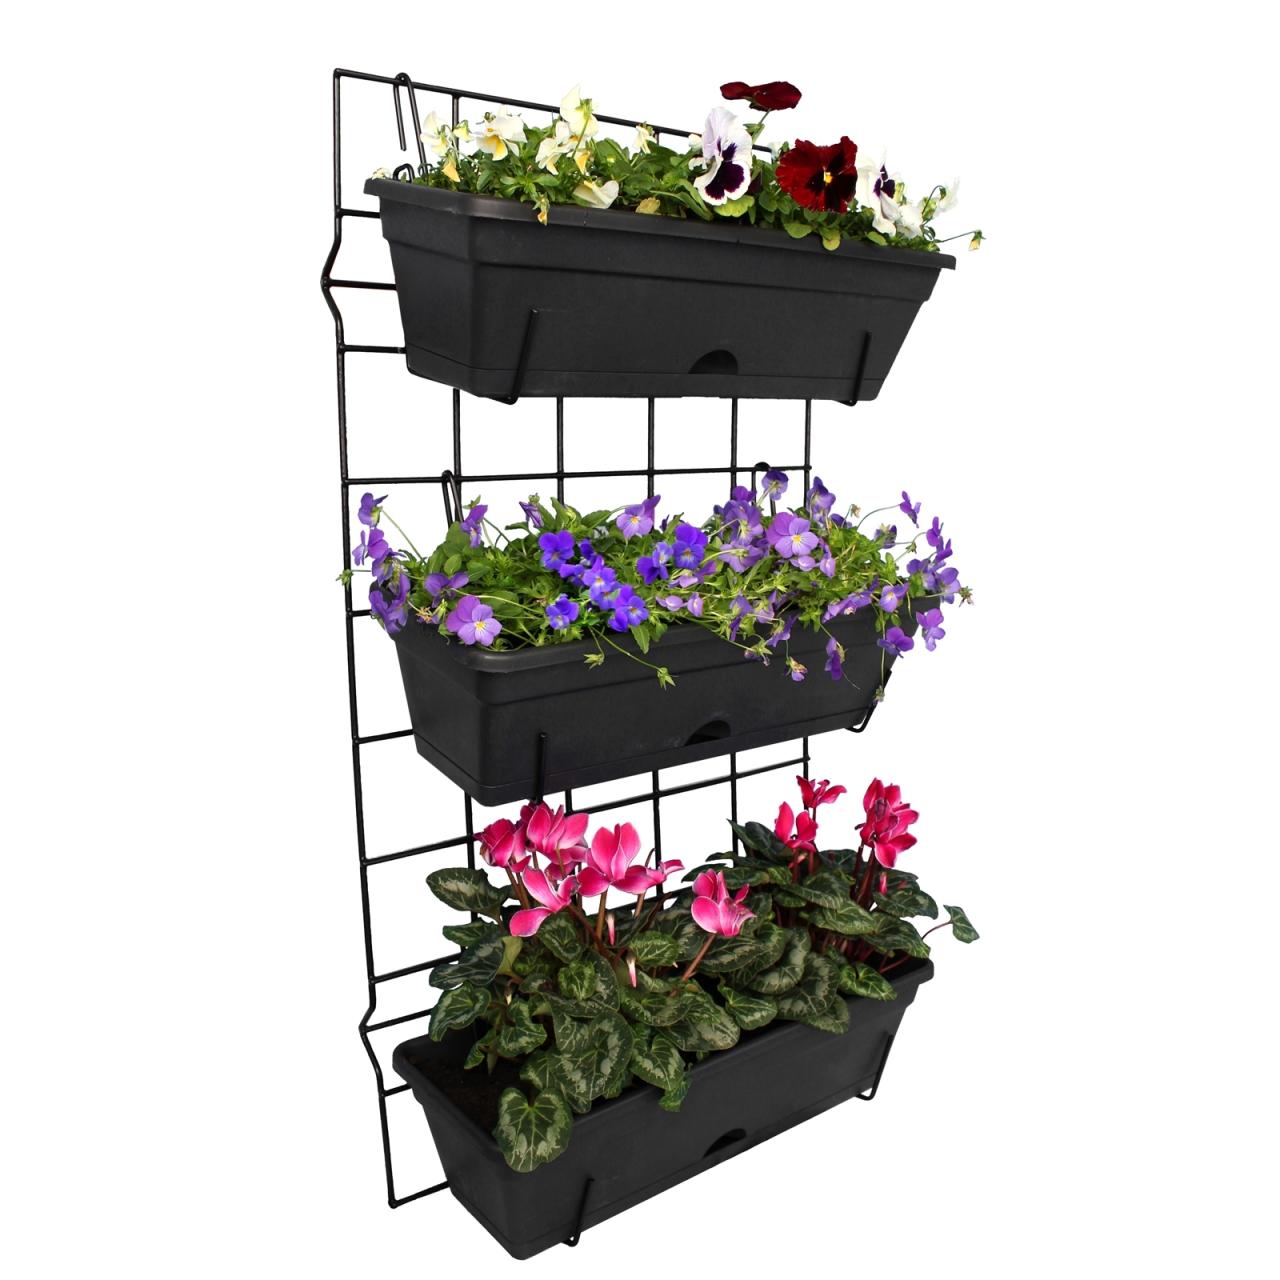 Hanging Plants Indoor | Bunnings Hanging Pot Plants: A Guide to Selection, Care, and Display